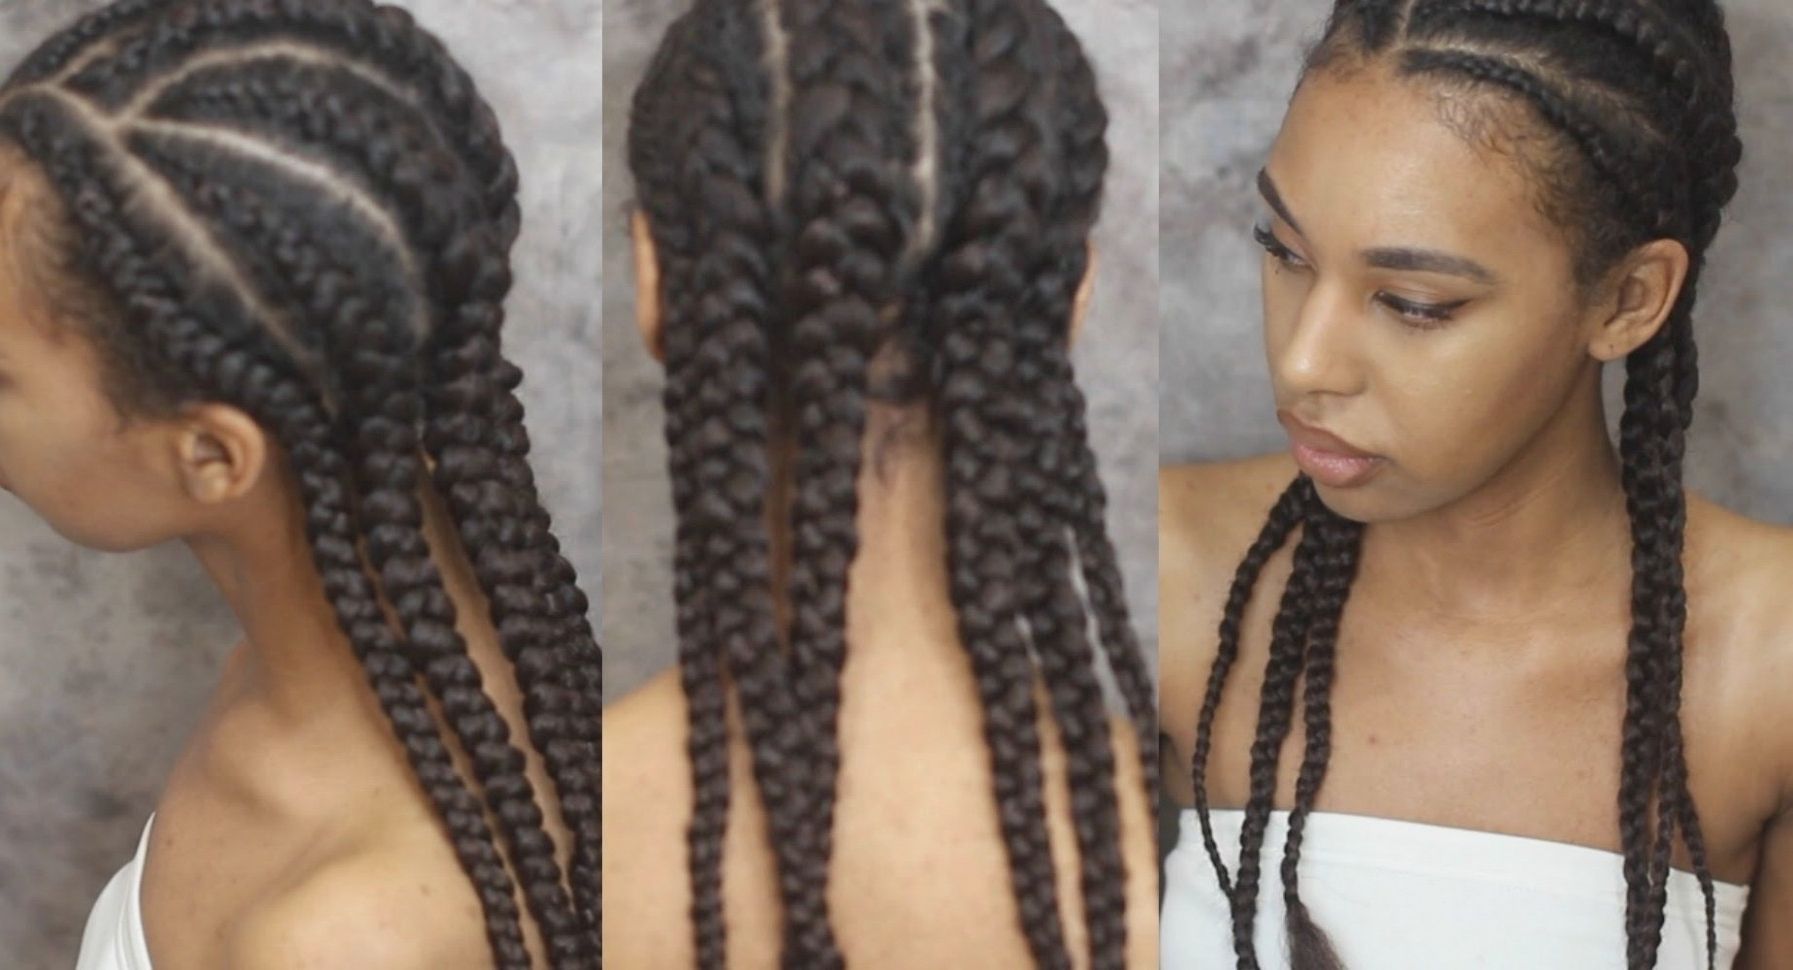 How To Braid Hair With Extensions Invisible Cornrows Youtube Regarding Popular Invisible Cornrows Hairstyles (View 8 of 15)